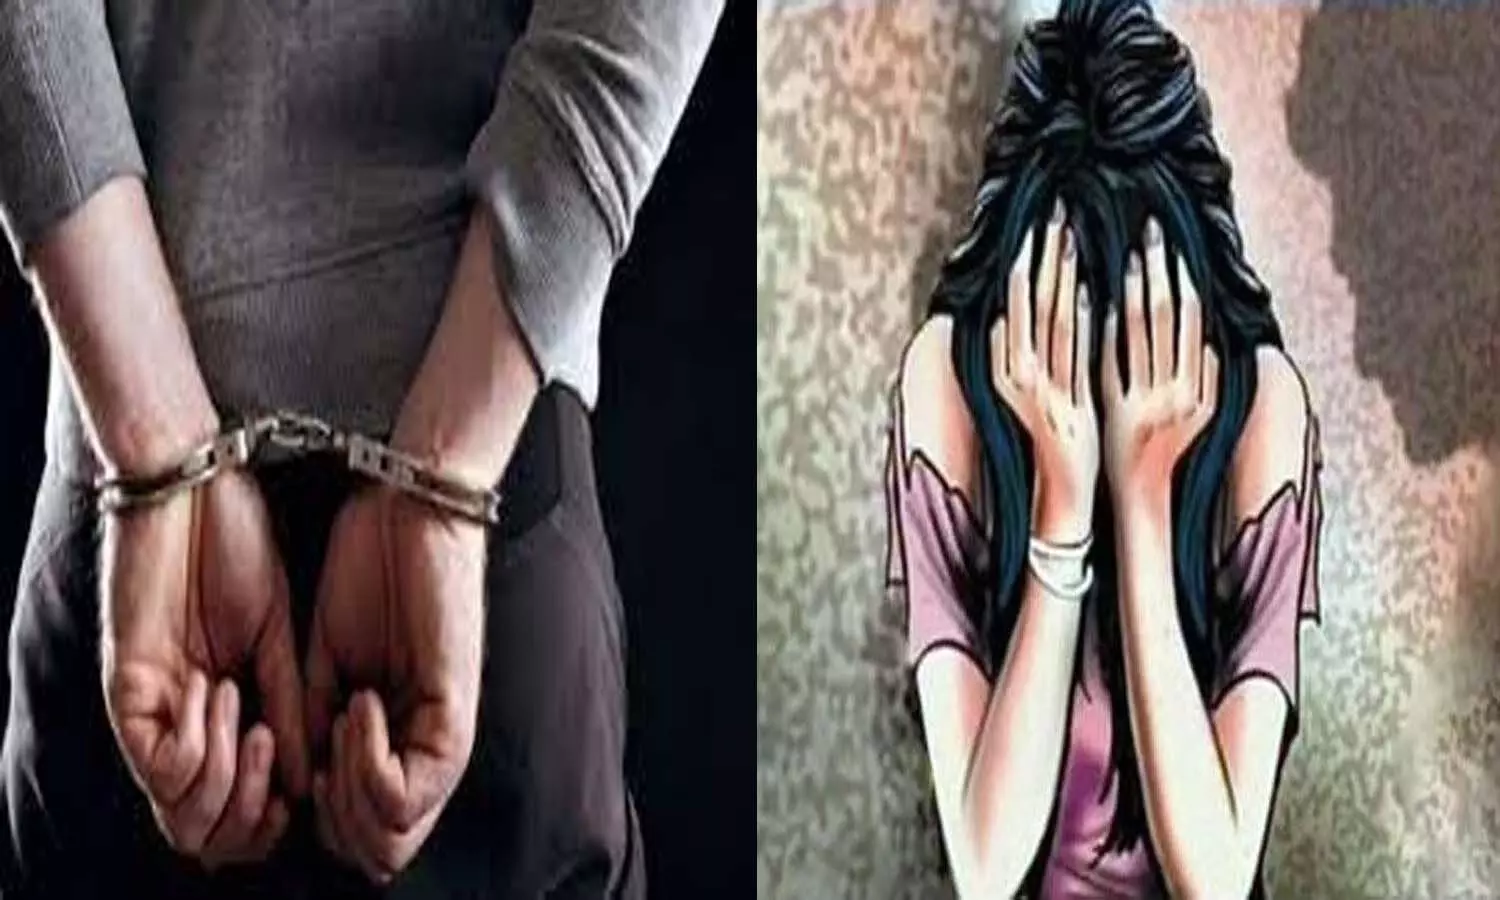 One arrested for burning eyes of woman with hot knife for protesting molestation